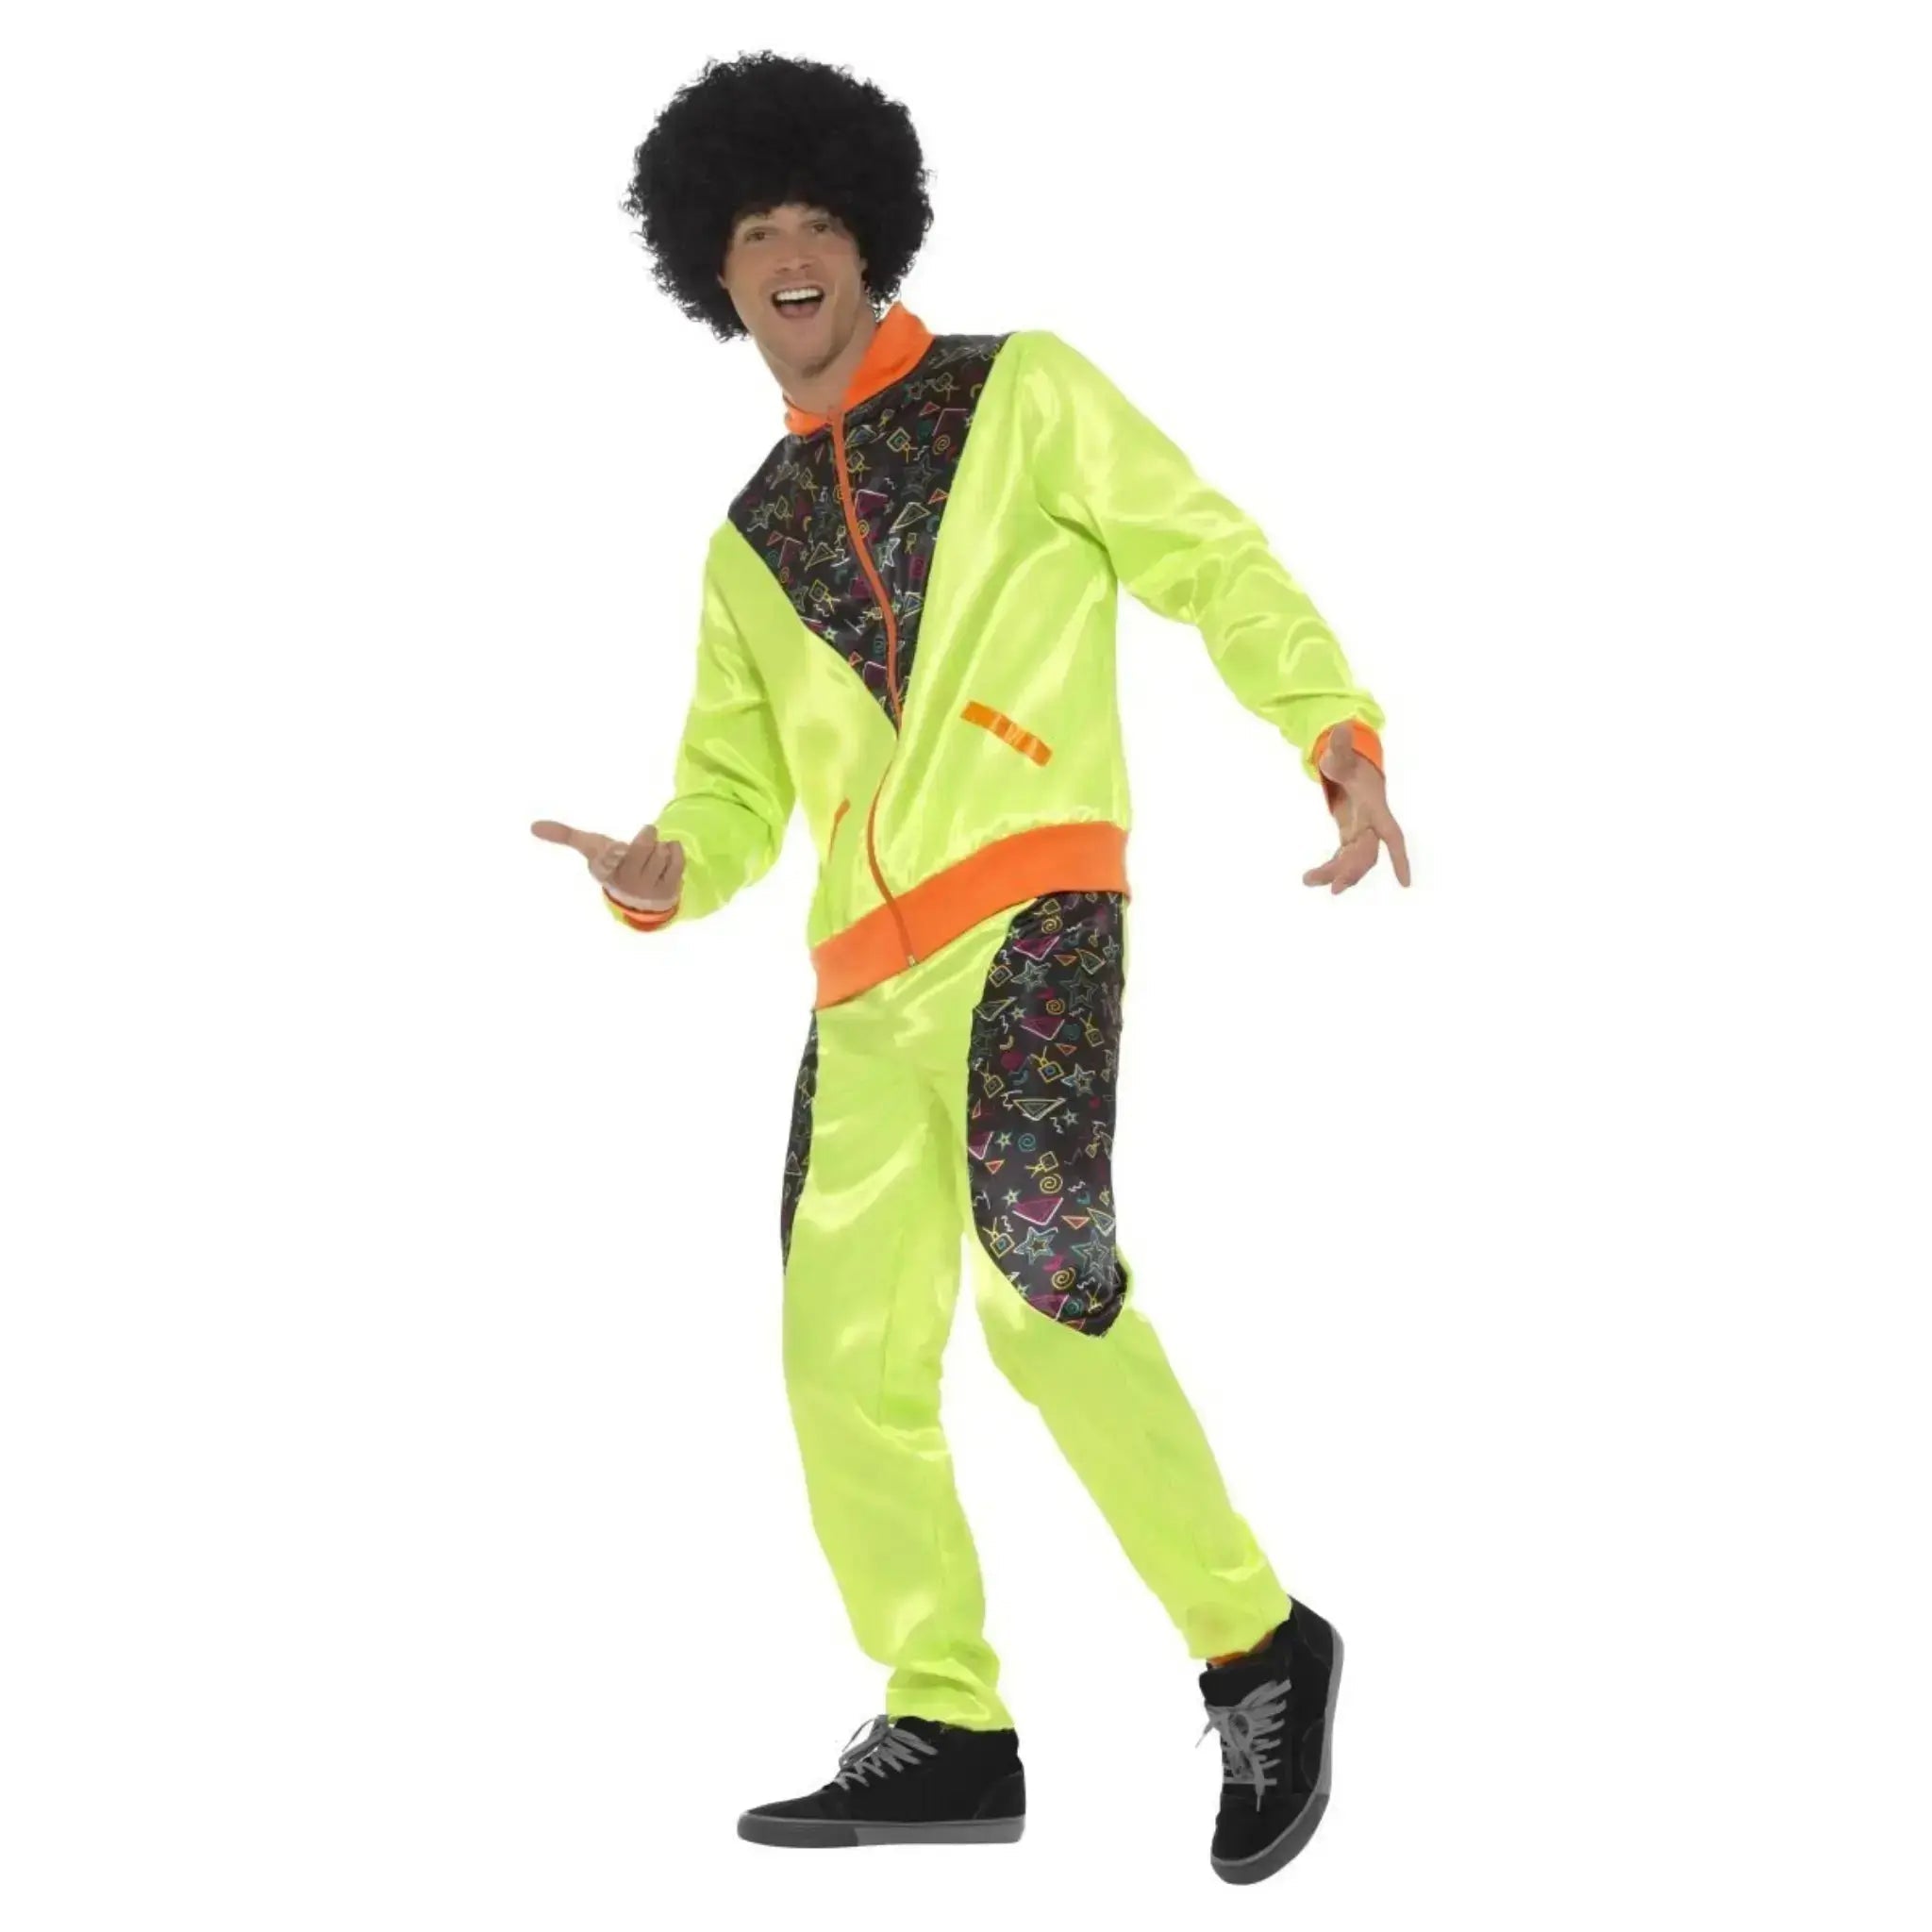 Retro Shell Suit Costume Mens | The Party Hut